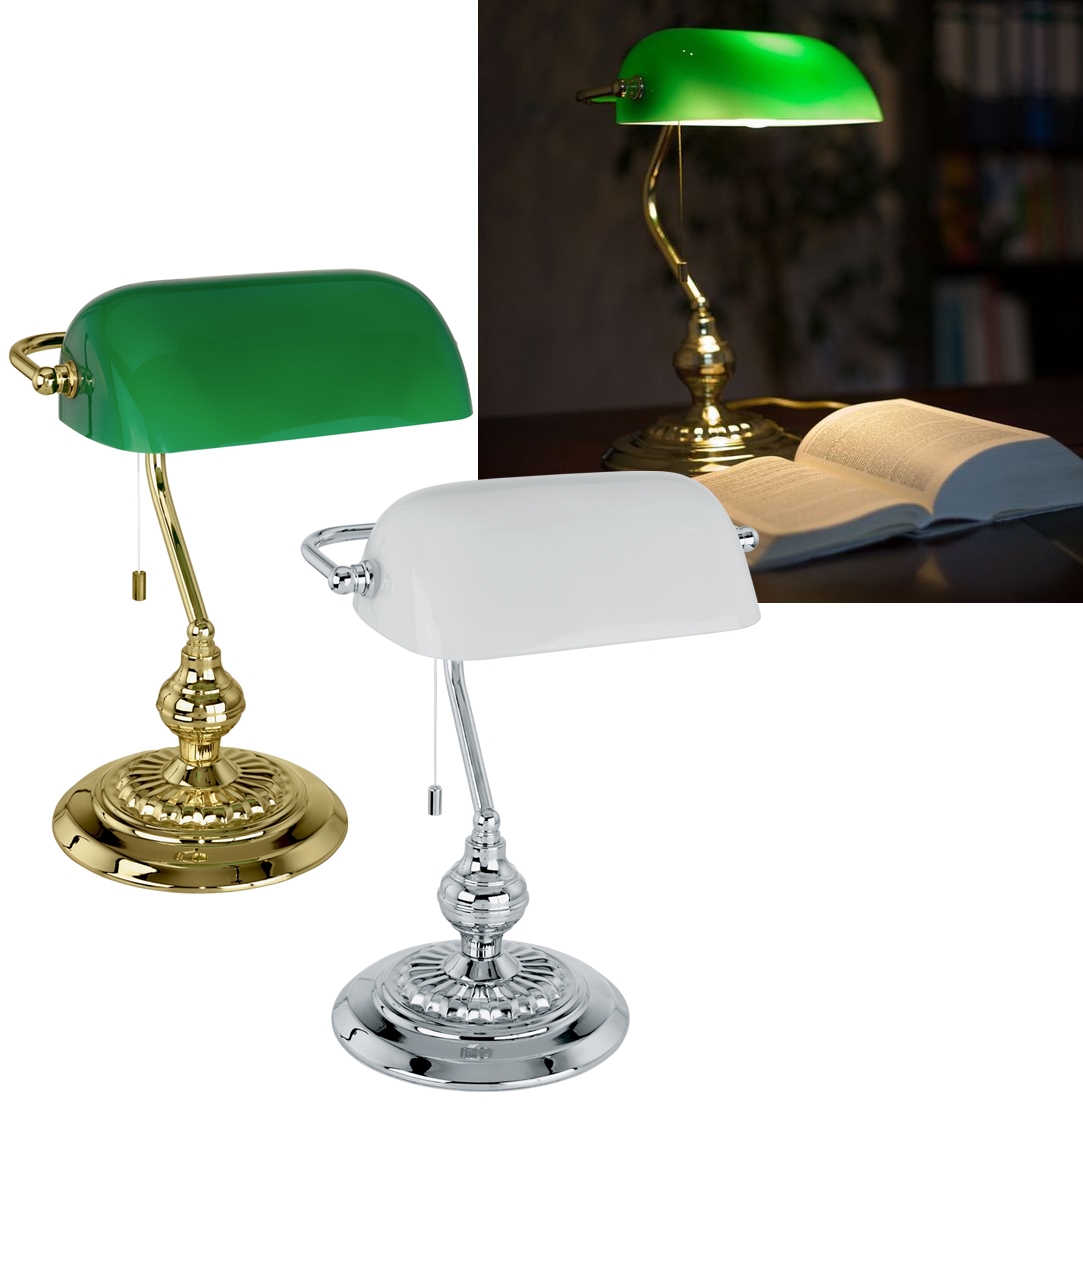 Traditional Bankers Glass Shade Table Lamp, Brass Desk Lamp With Green Glass Shade